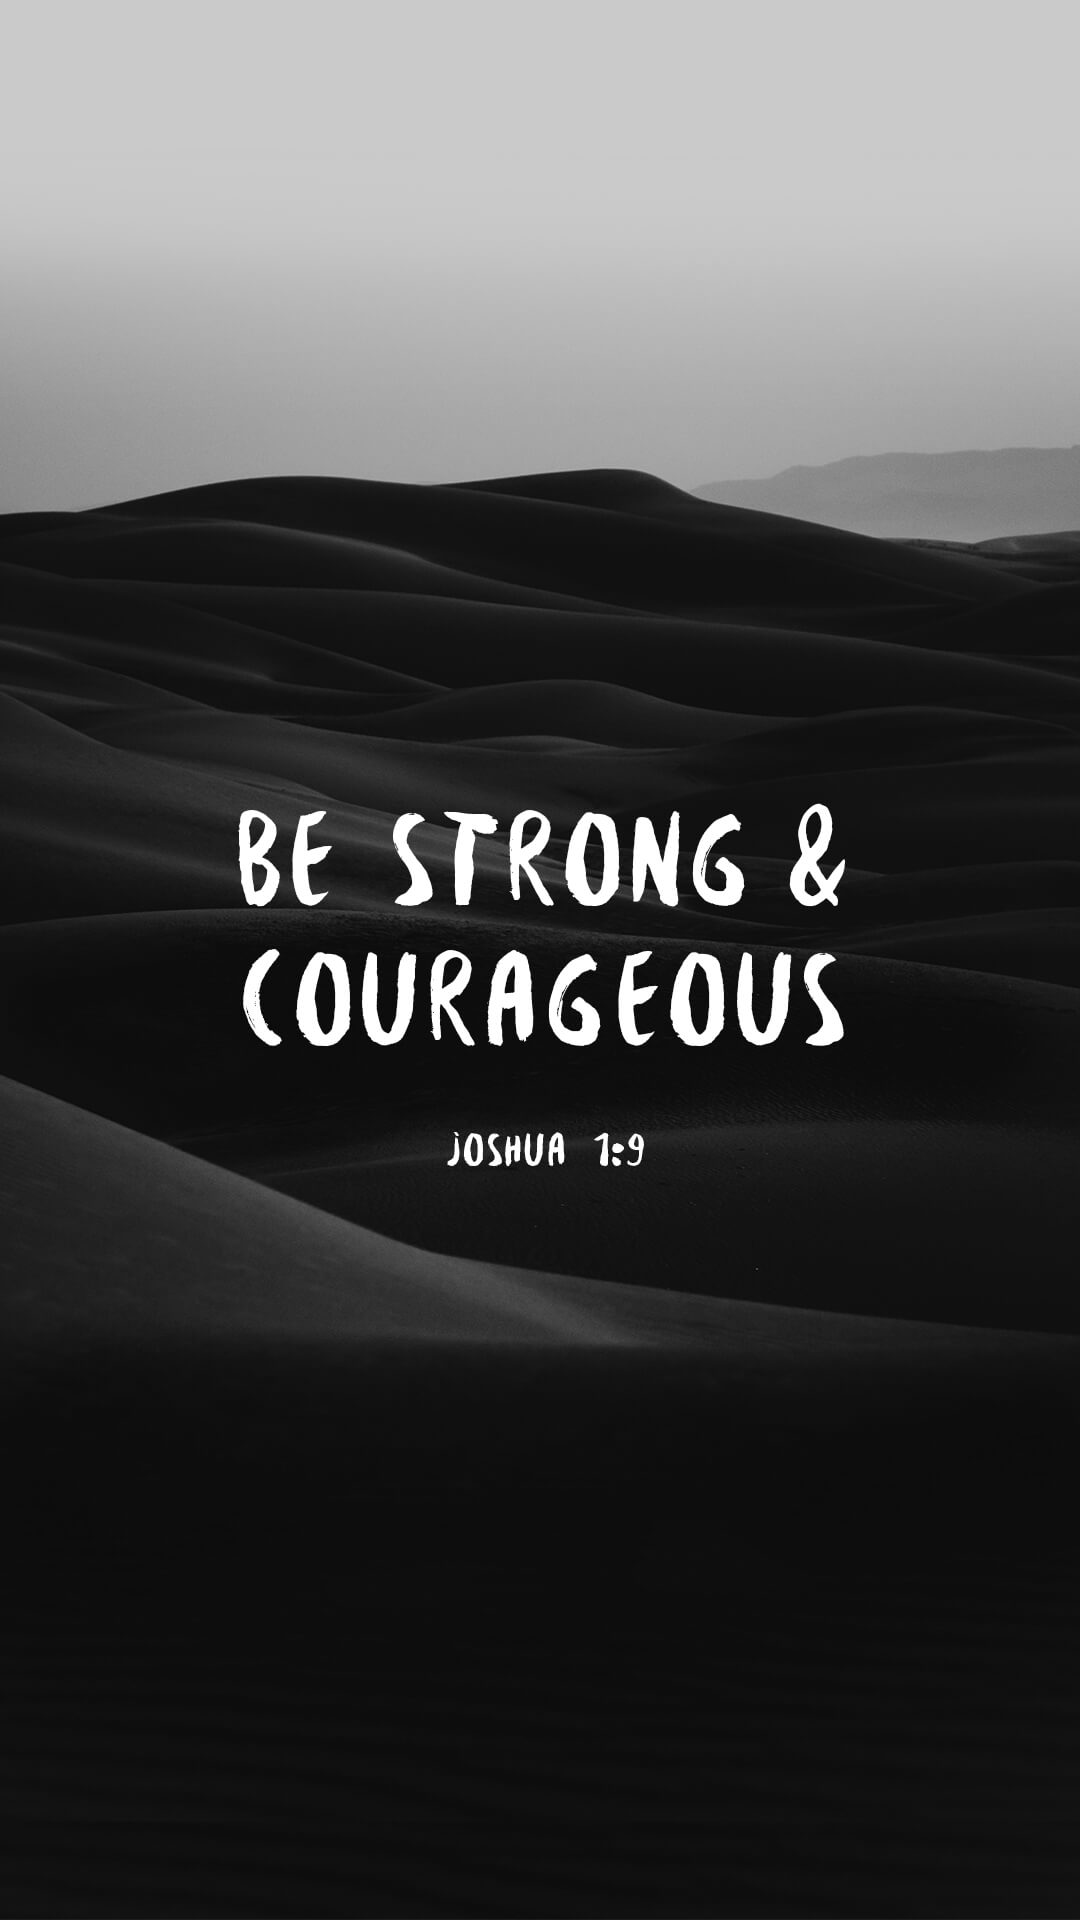 famous bible verses about strength